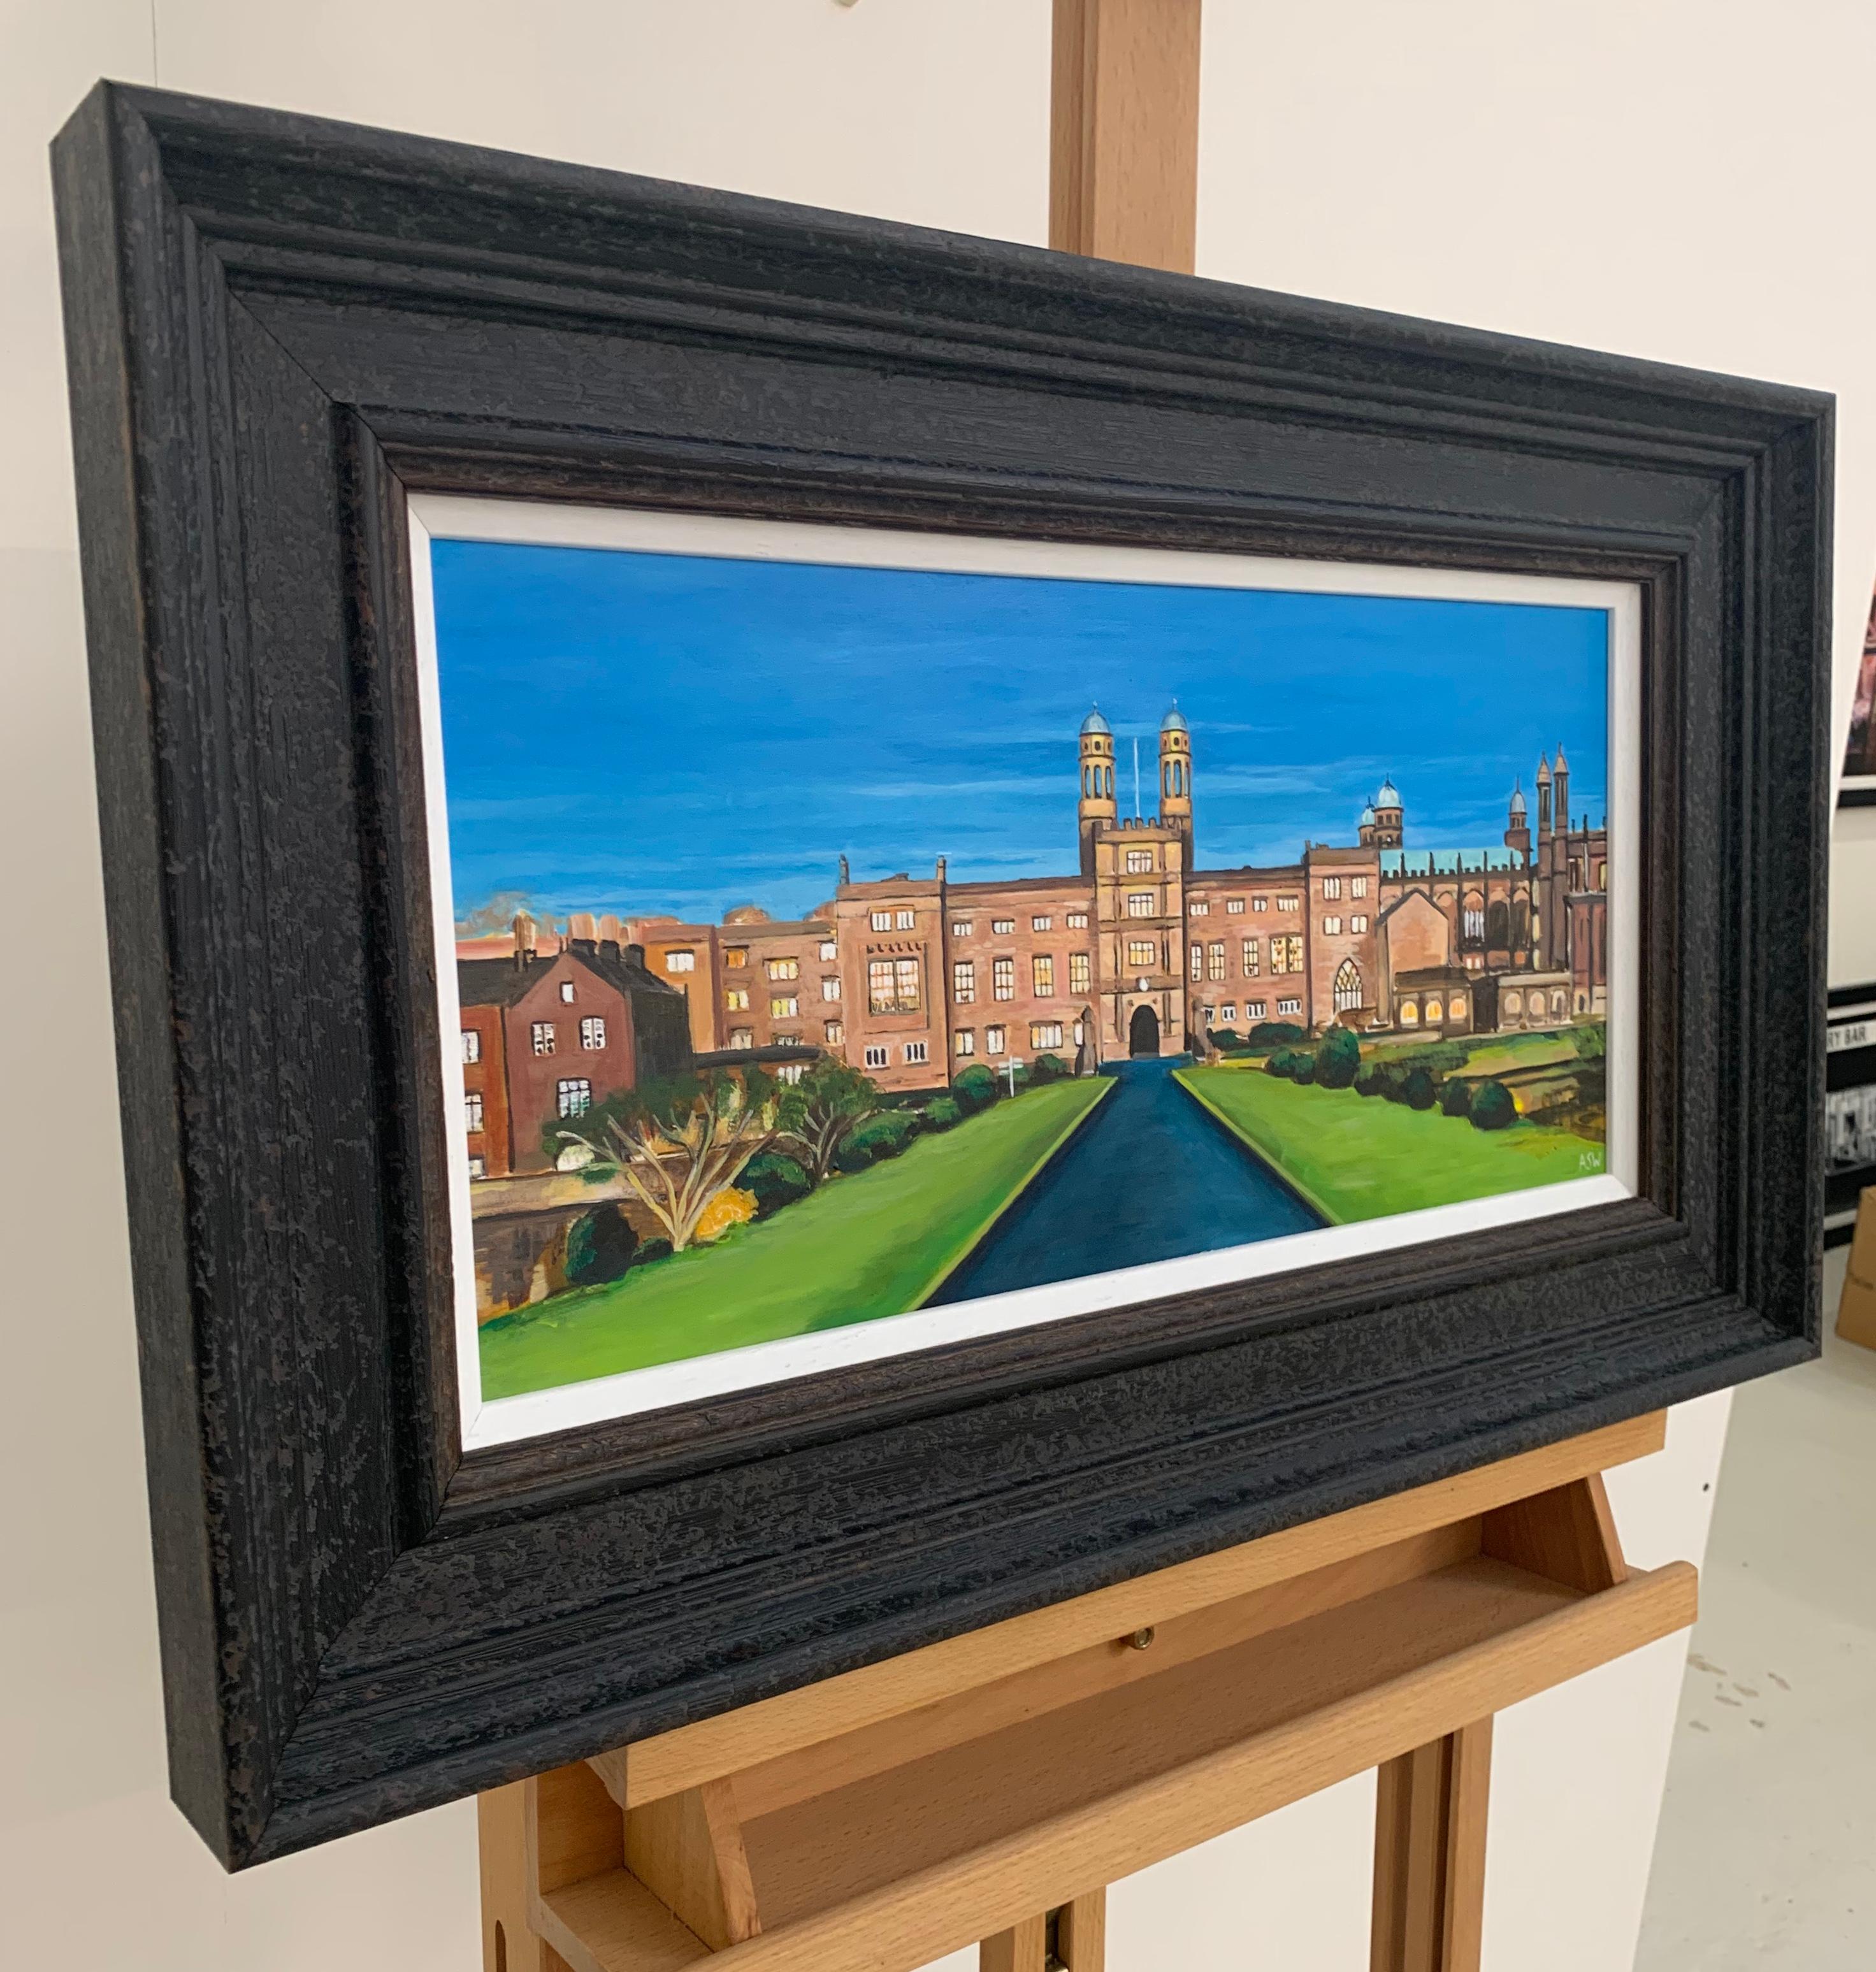 Stonyhurst College 16th Century Grade 1 Listed Building in English Countryside - Painting by Angela Wakefield